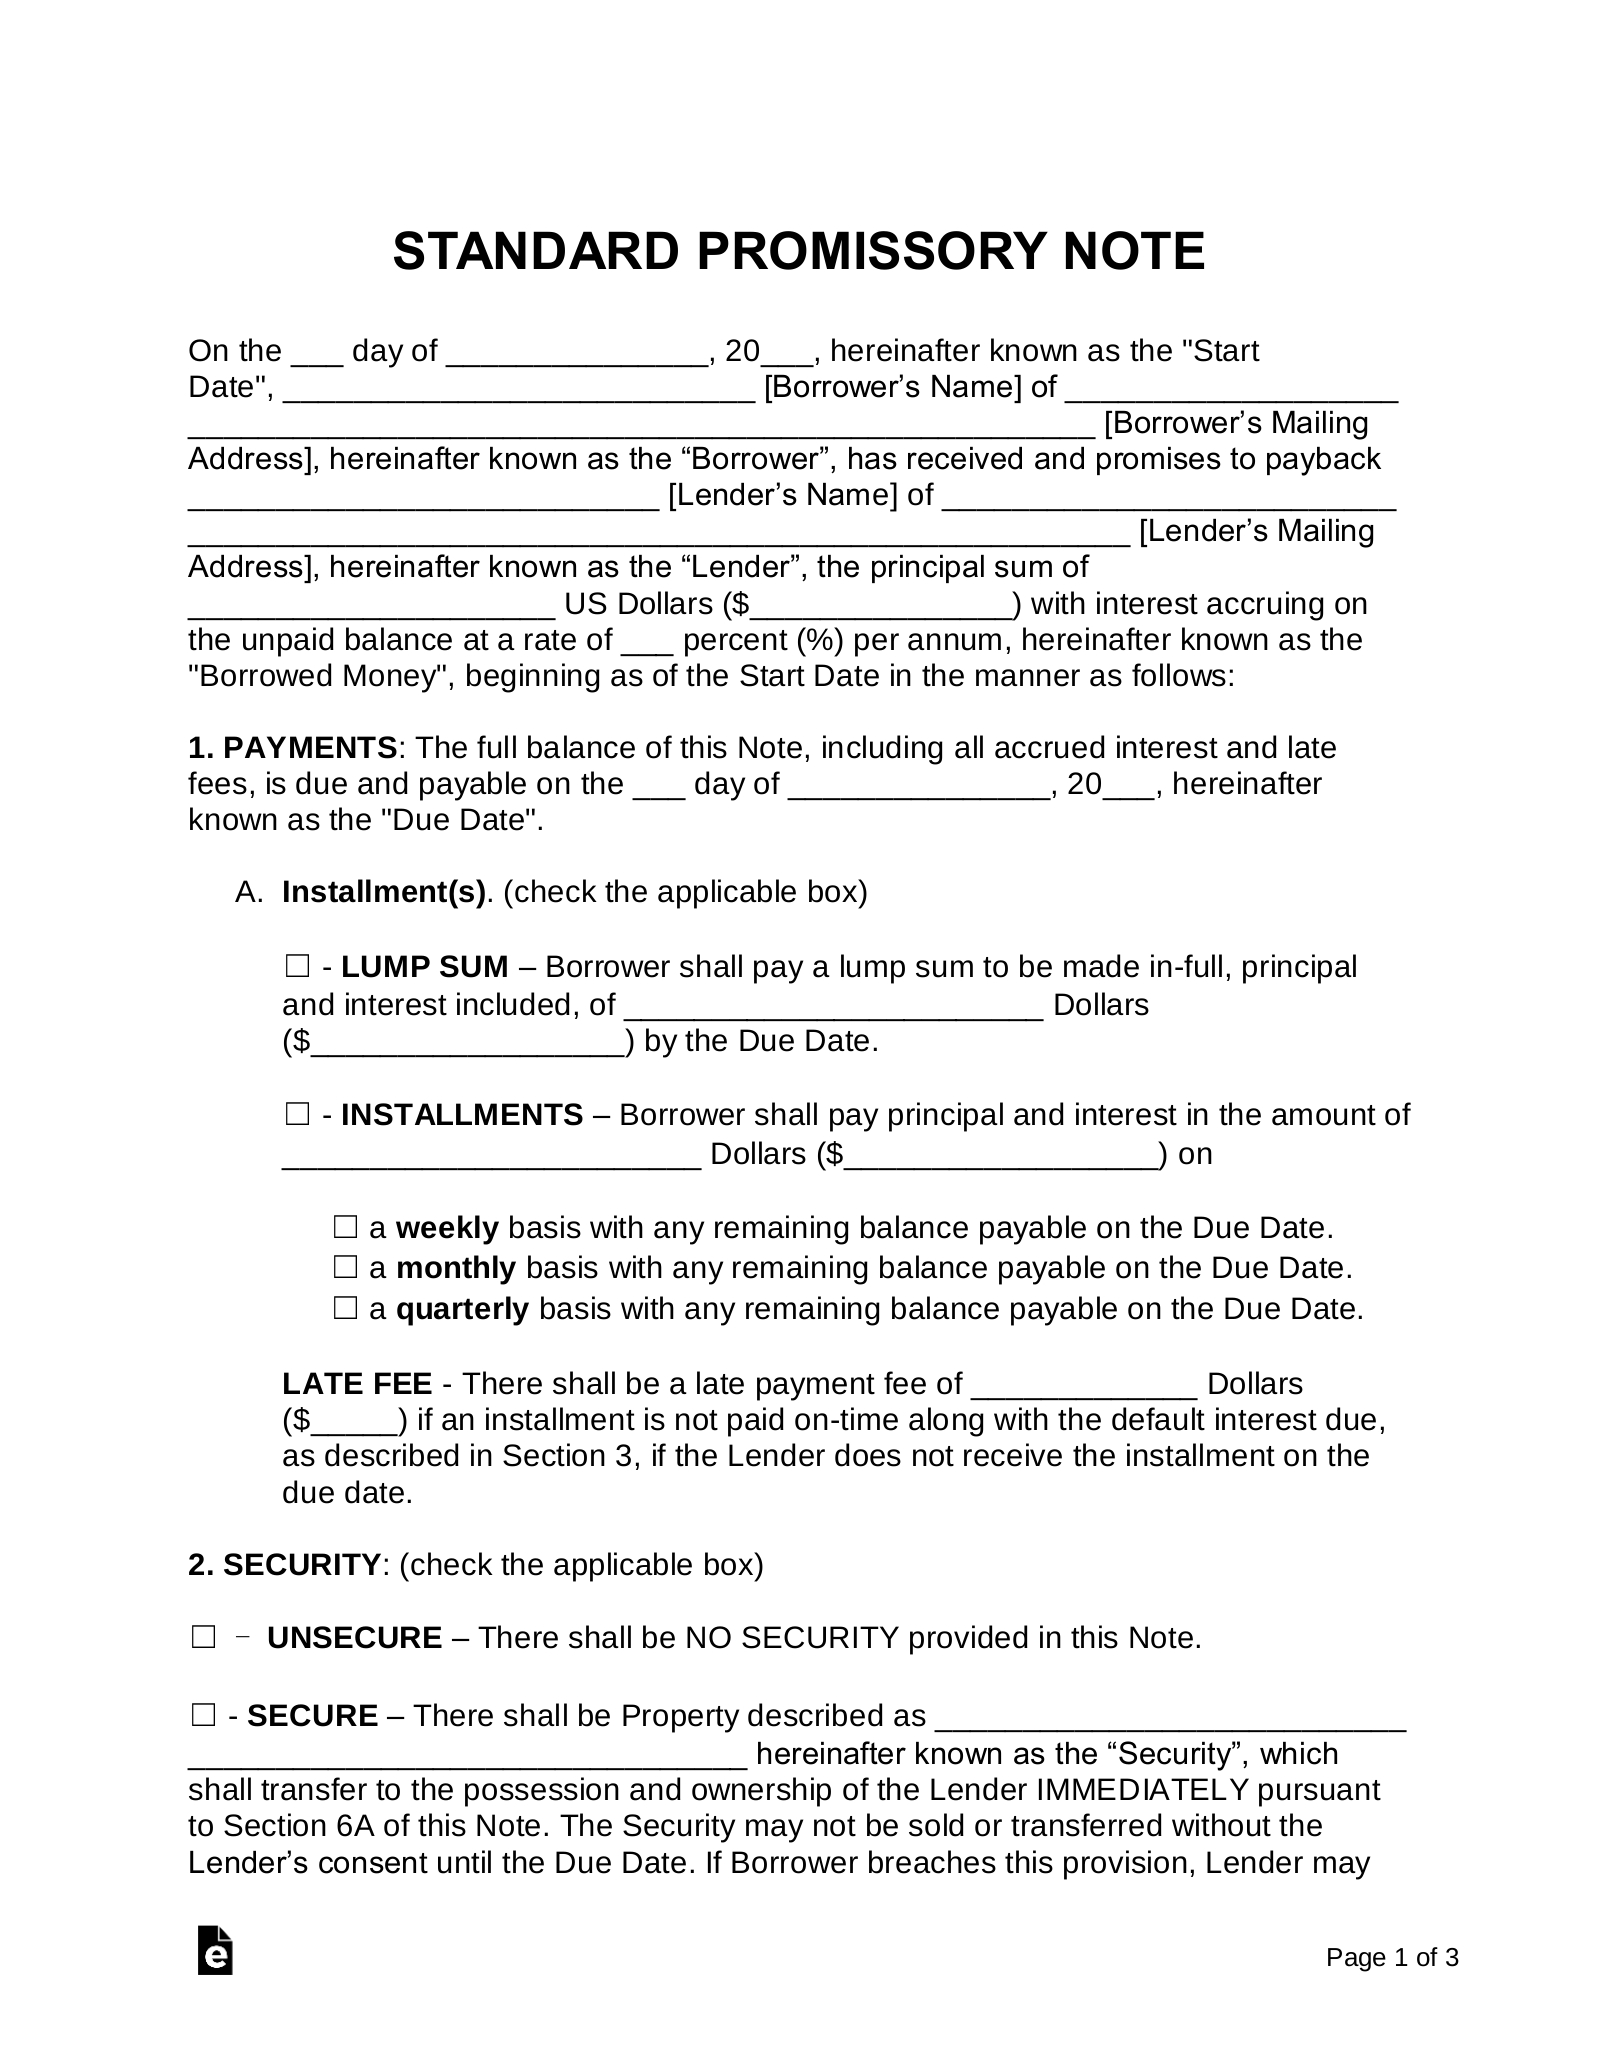 Free Promissory Note Templates – Word | Pdf | Eforms – Free With Regard To Free Promissory Note Template For Personal Loan